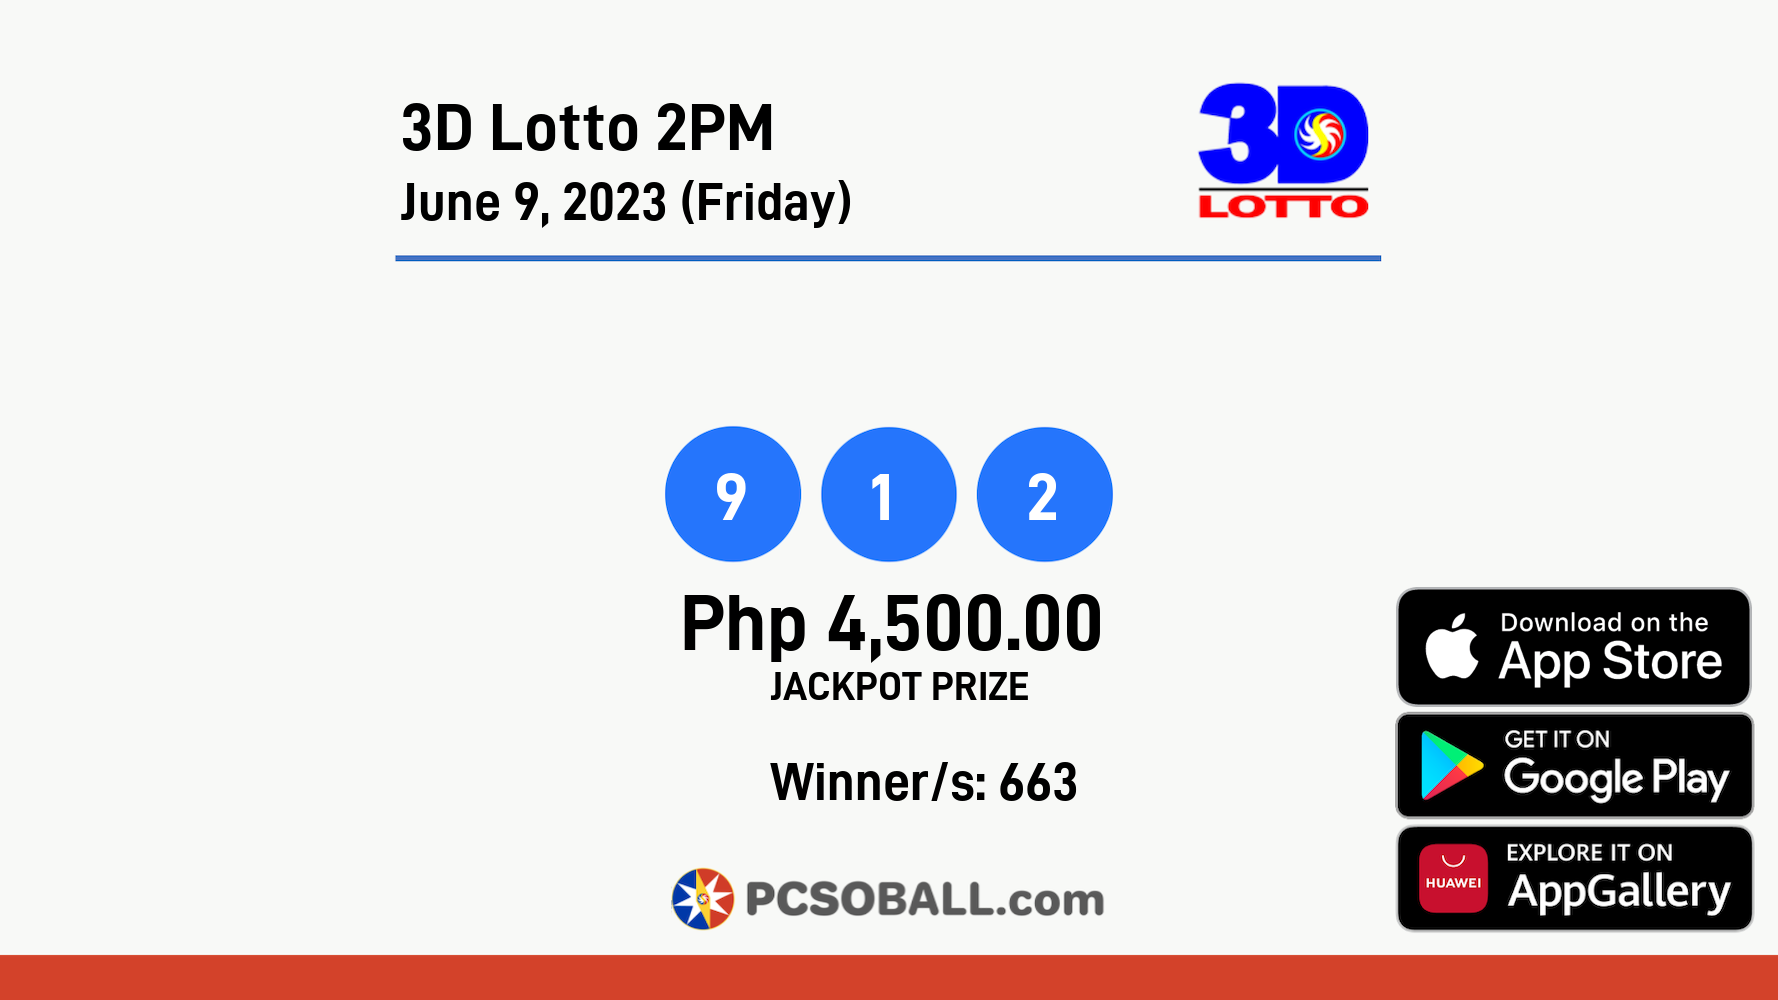 3D Lotto 2PM June 9, 2023 (Friday) Result